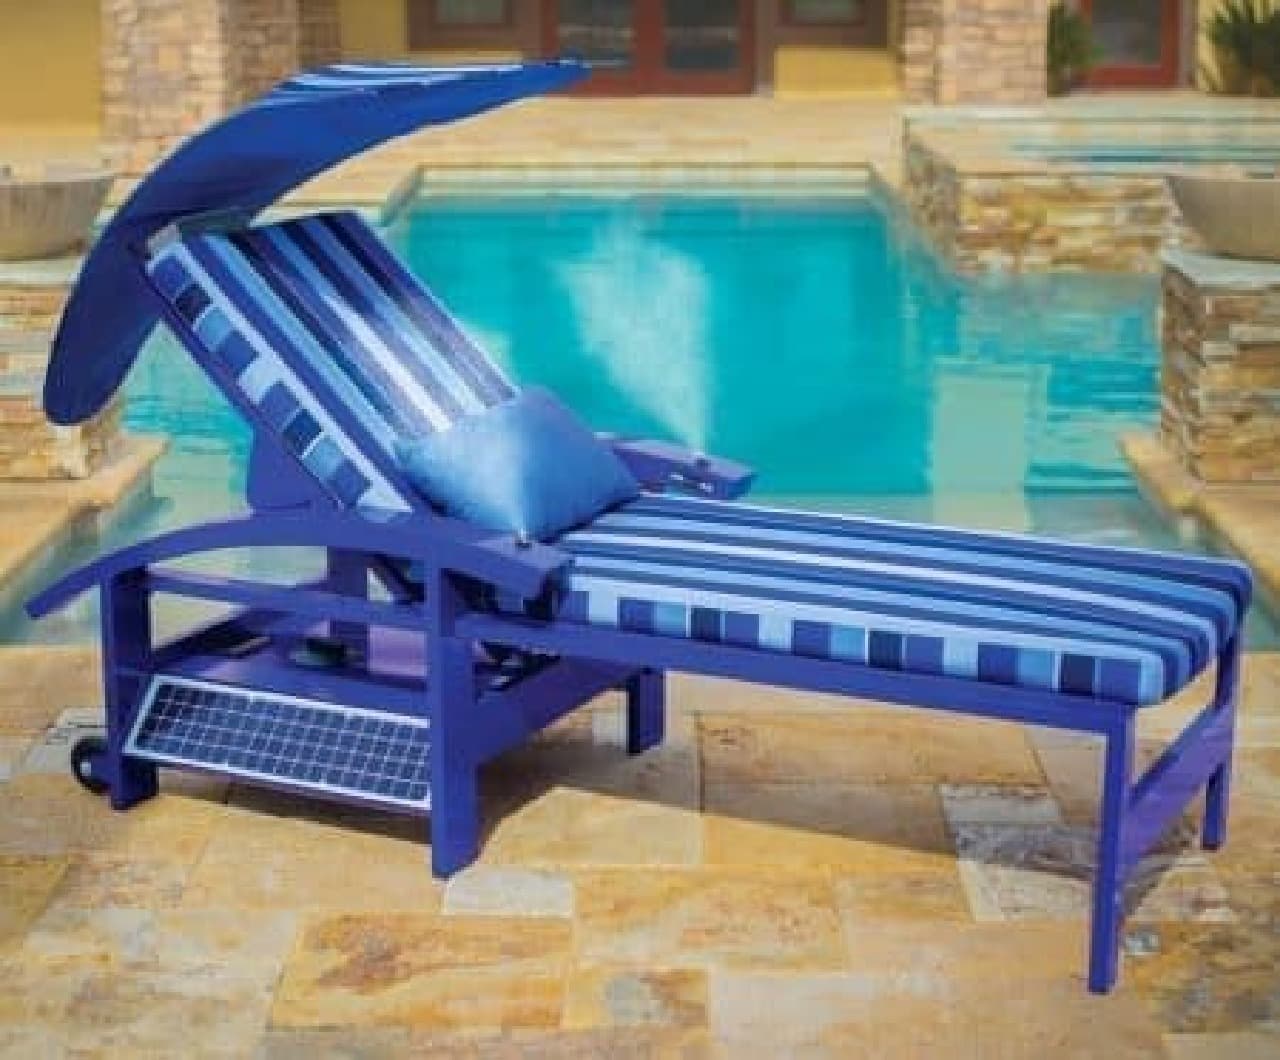 This is the ideal beach chair!